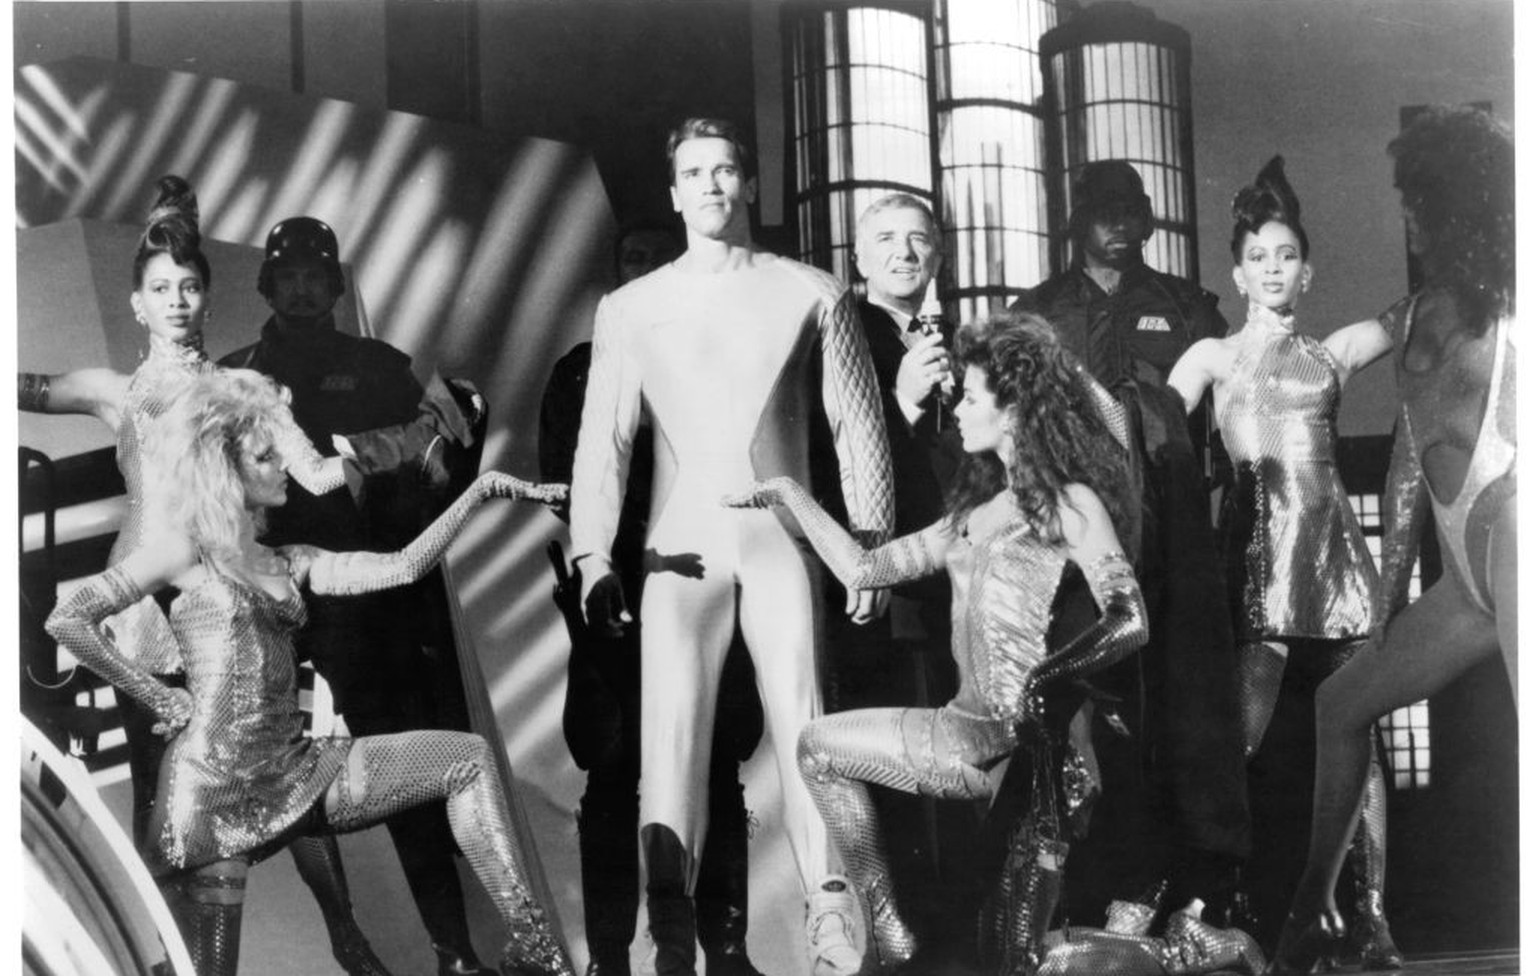 Actors Richard Dawson and Arnold Schwarzenegger on set of the movie &quot;The Running Man&quot; in 1987. (Photo by Michael Ochs Archives/Getty Images)